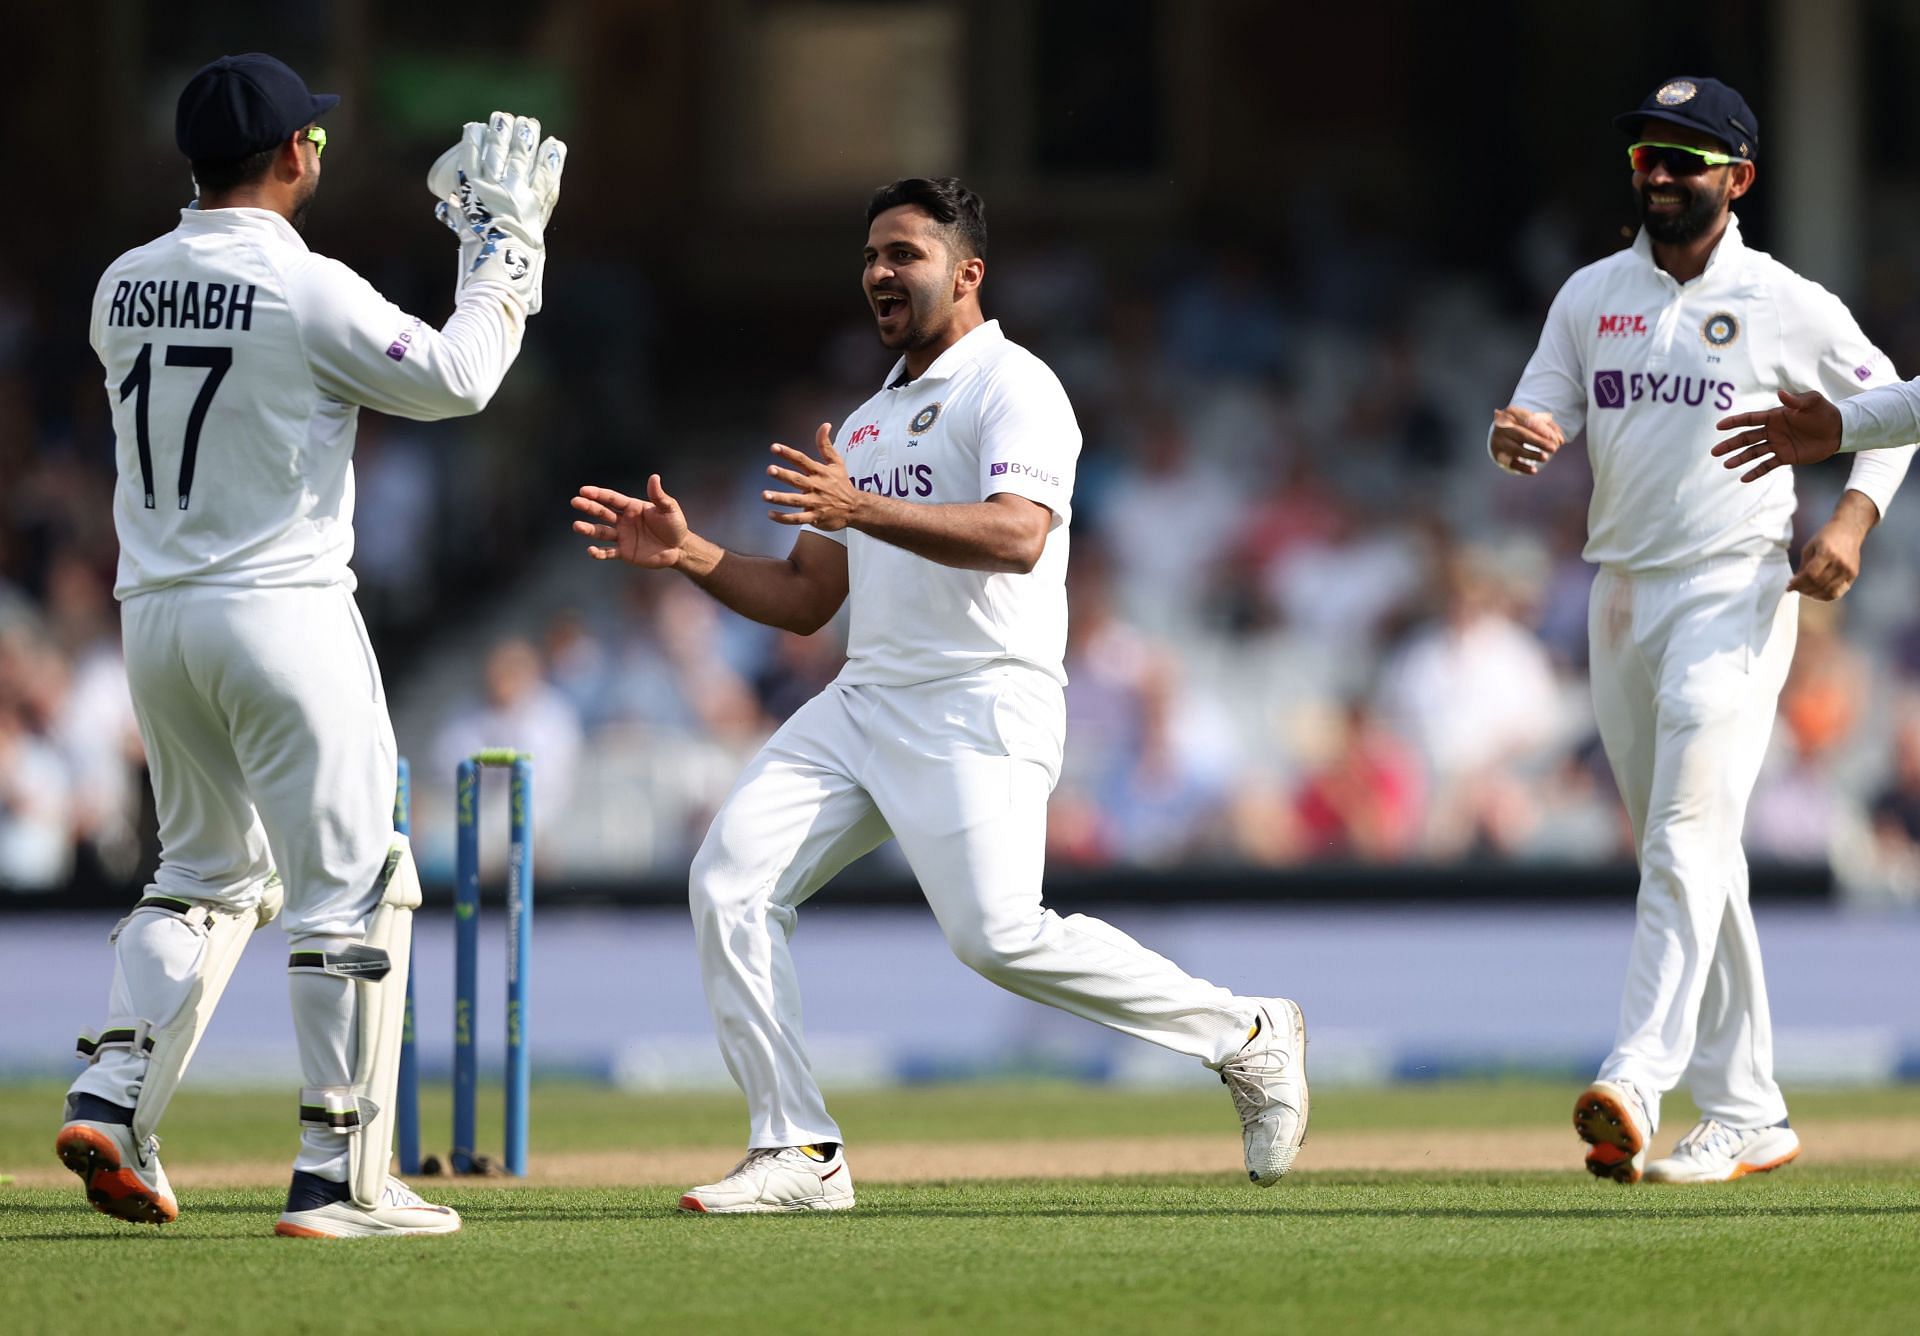 Shardul Thakur celebrates a wicket during The Oval Test. Pic: Getty Images